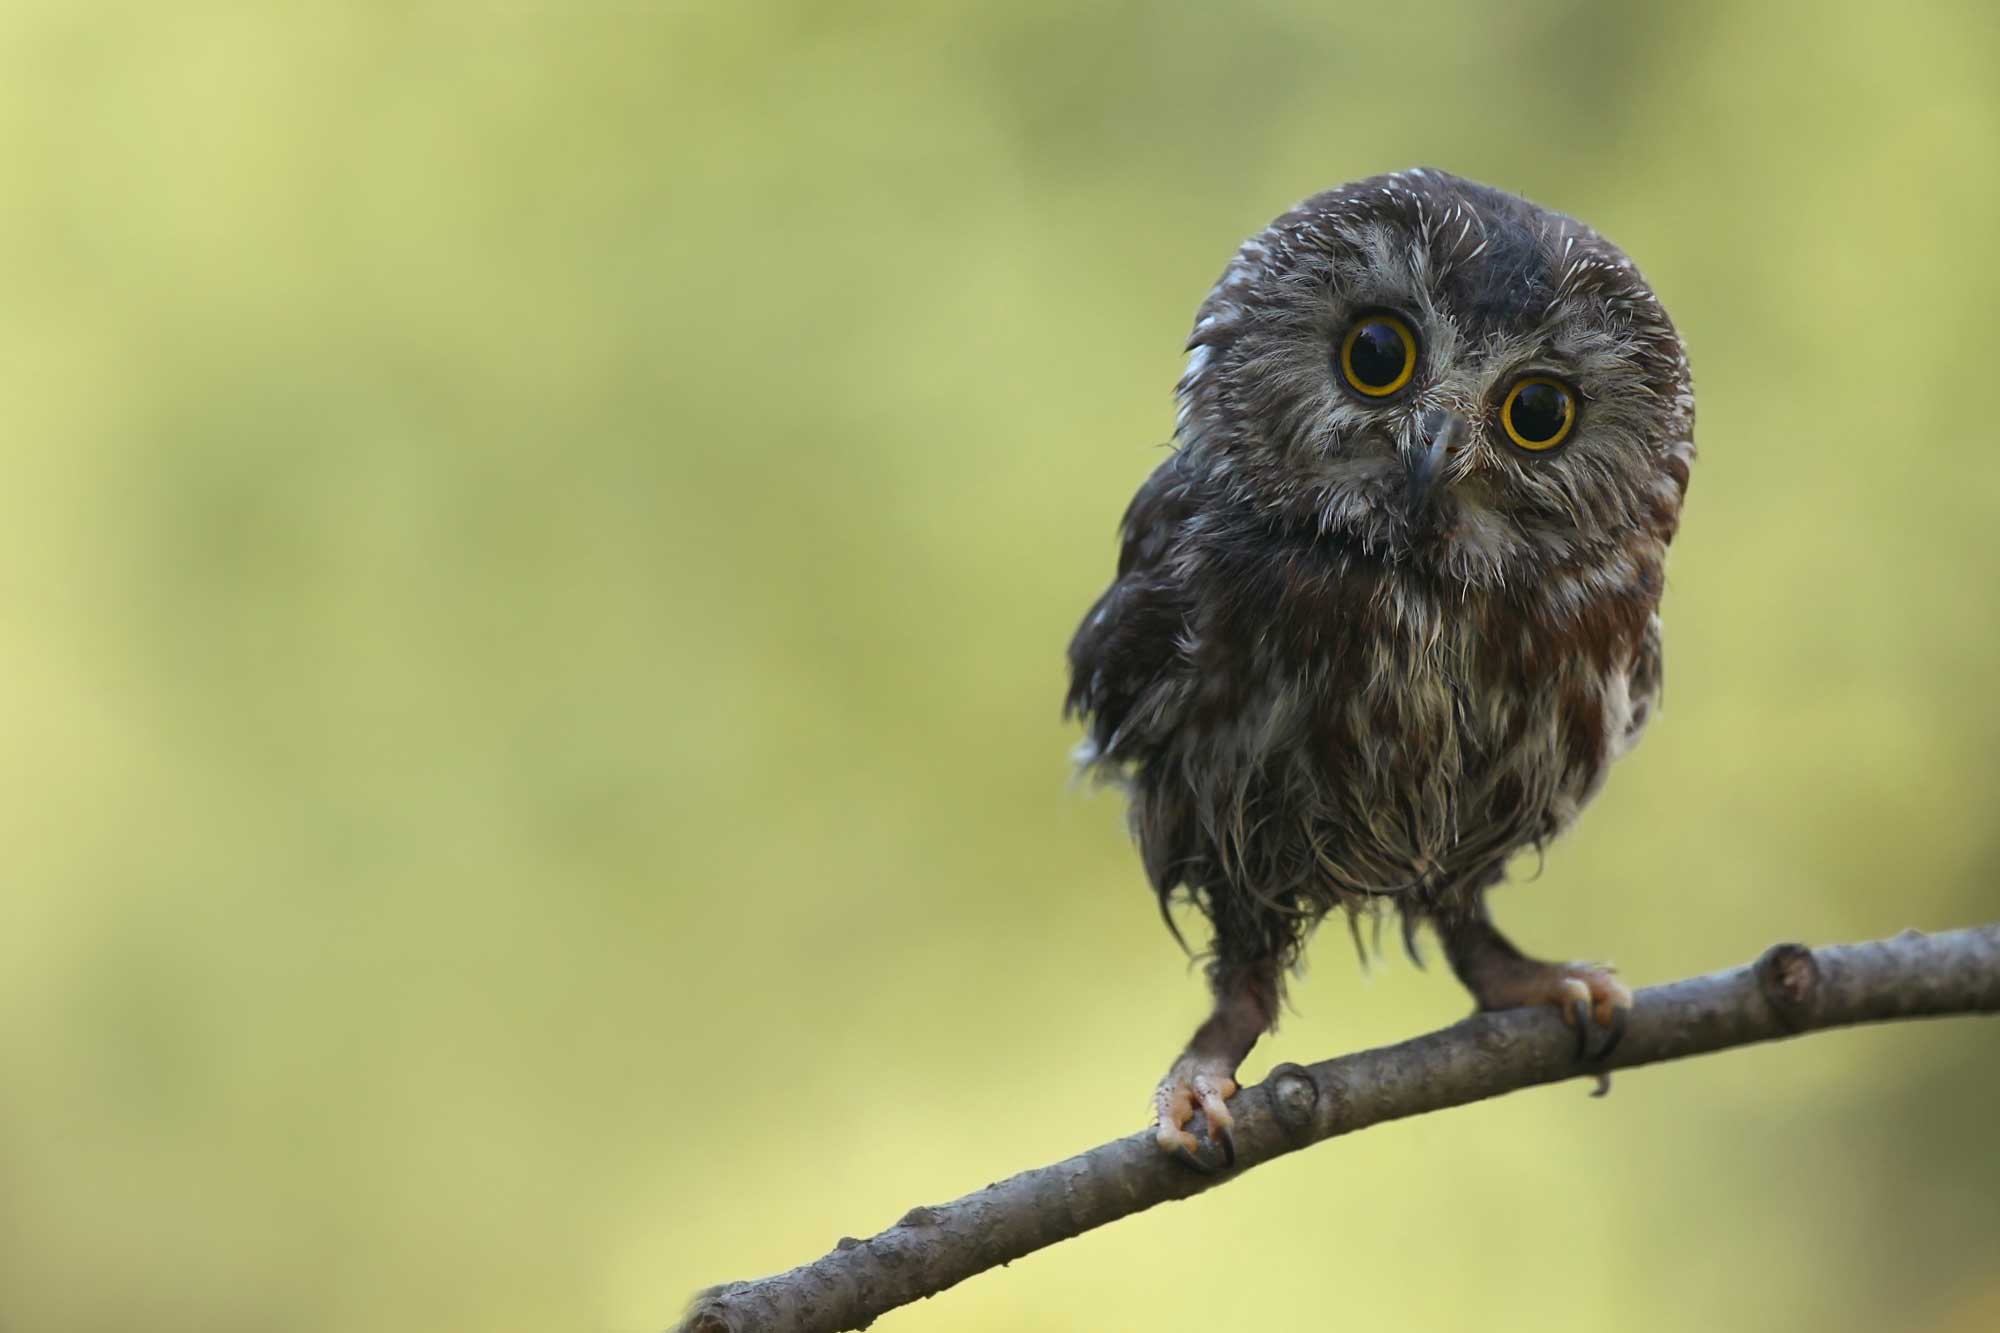 A northern saw-whet owl perched on a broken branch.